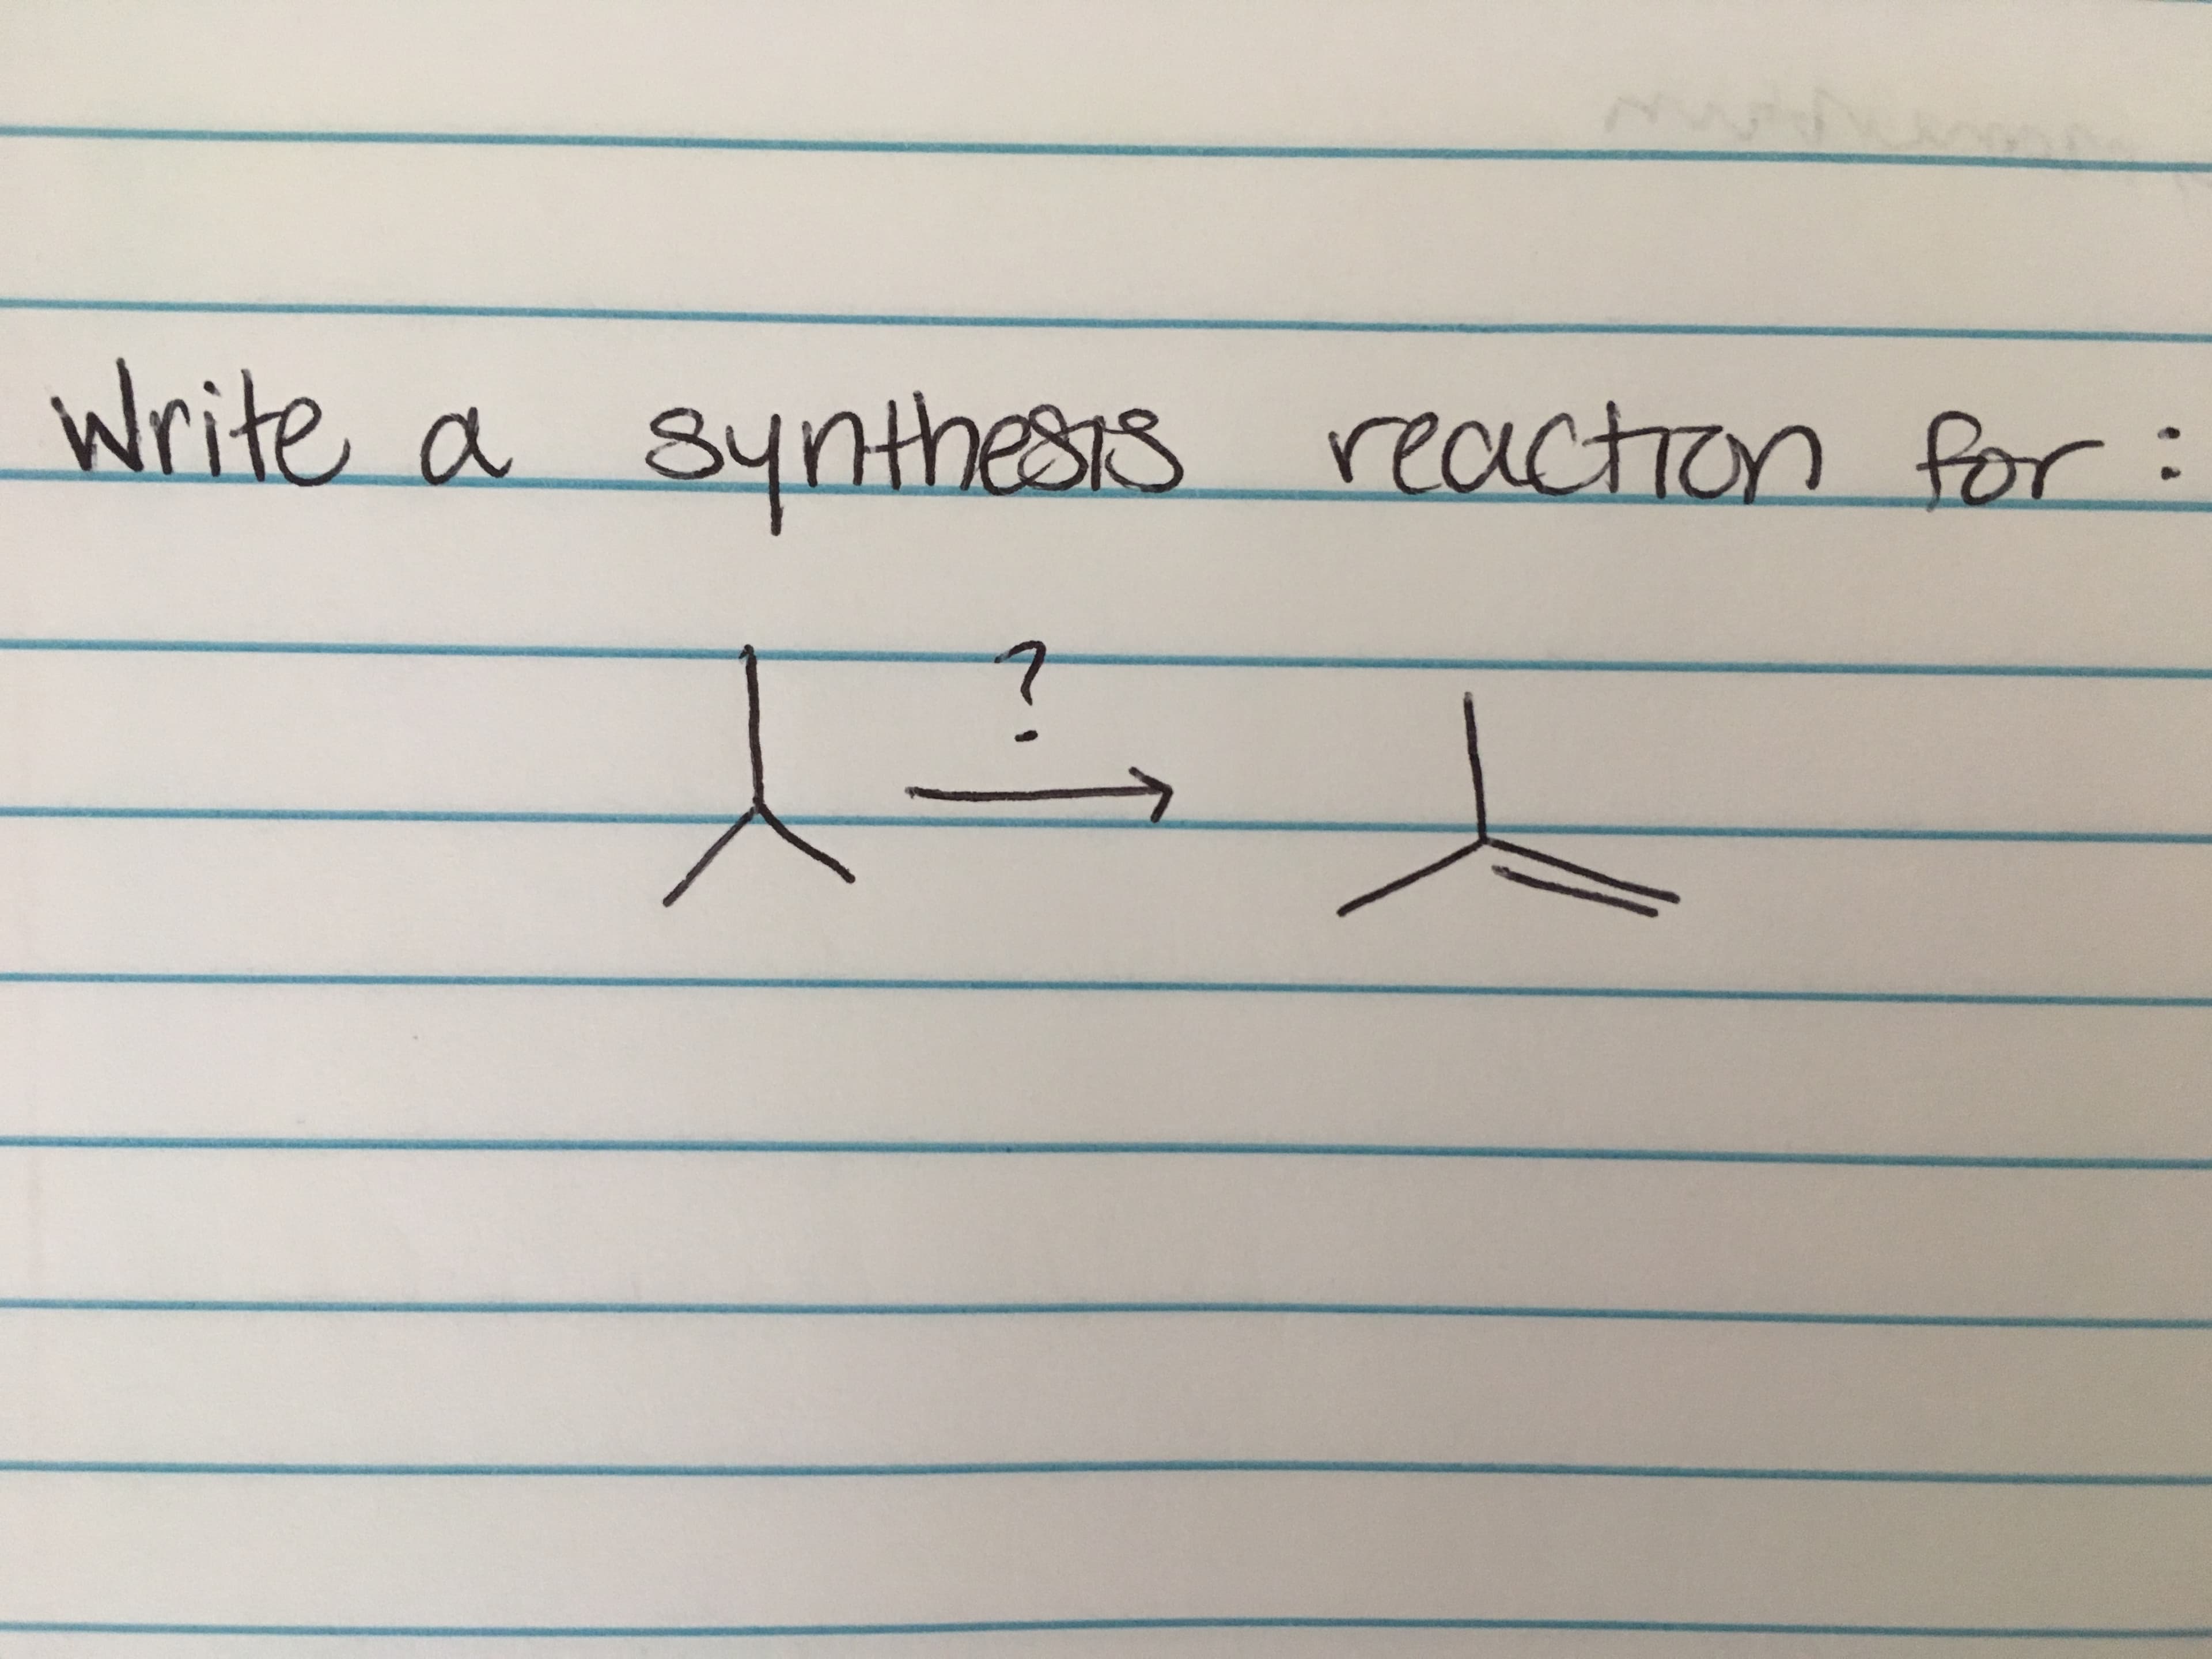 Write a
synthesis reaction for:
818
